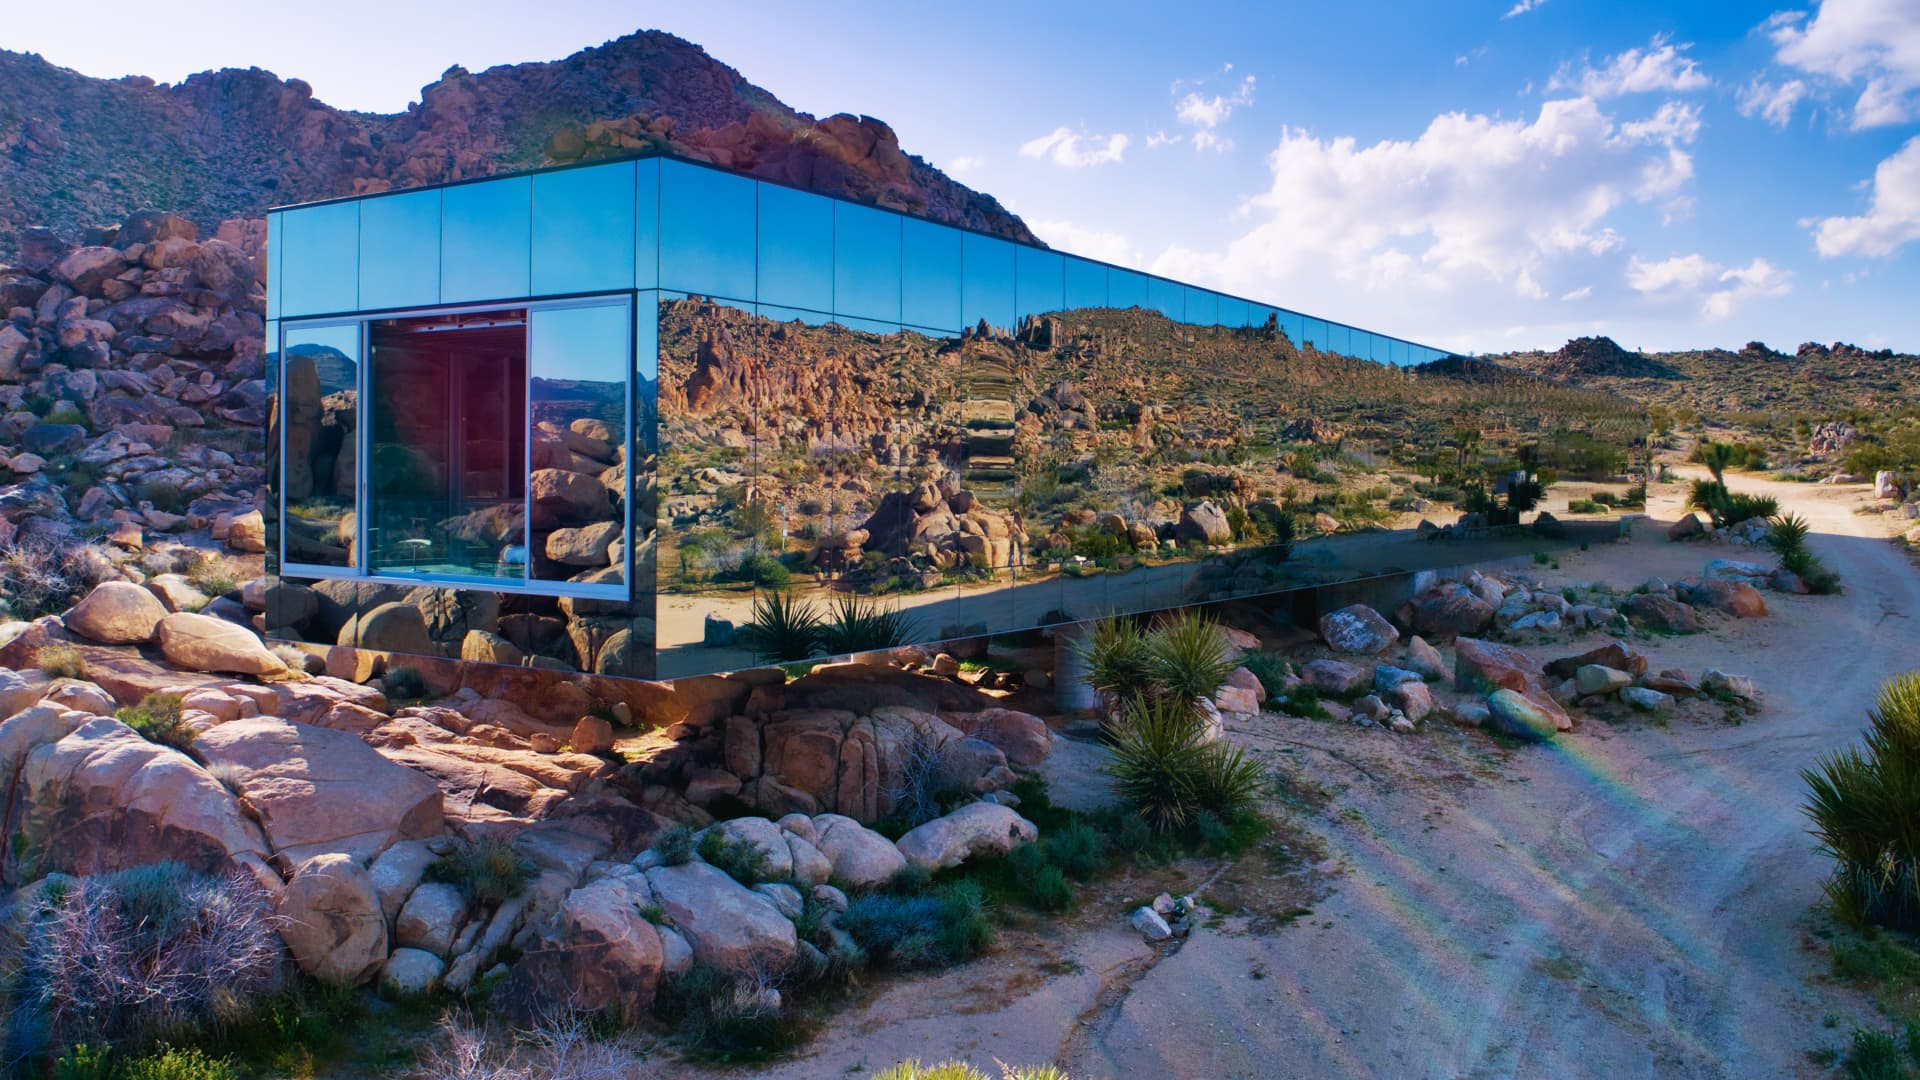 The Invisible House's mirror-clad facade creates the illusion of the home disappearing into the desert landscape.